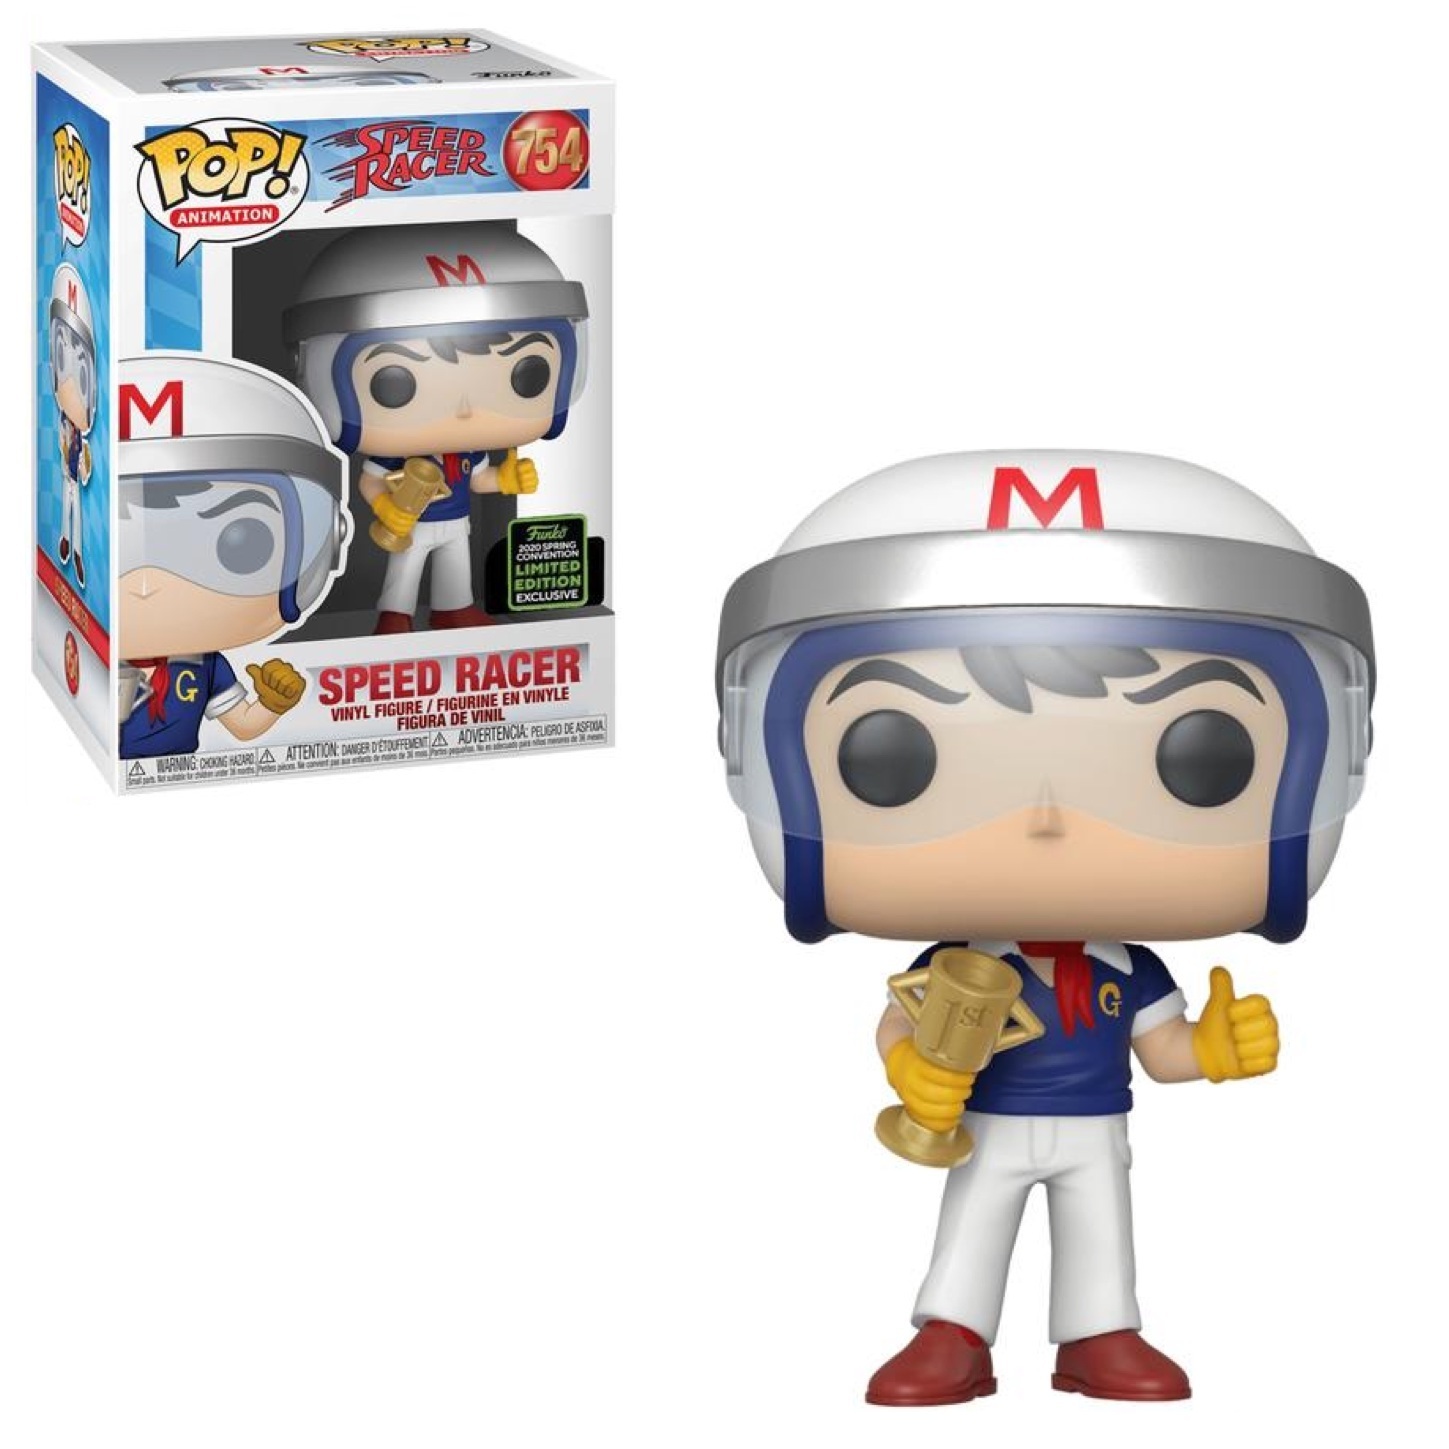 vrijdag krater Kosten Funko POP! Vinyl Figure - Speed Racer (with Trophy) (Spring Convention)  (Mint): Sell2BBNovelties.com: Sell TY Beanie Babies, Action Figures,  Barbies, Cards & Toys selling online